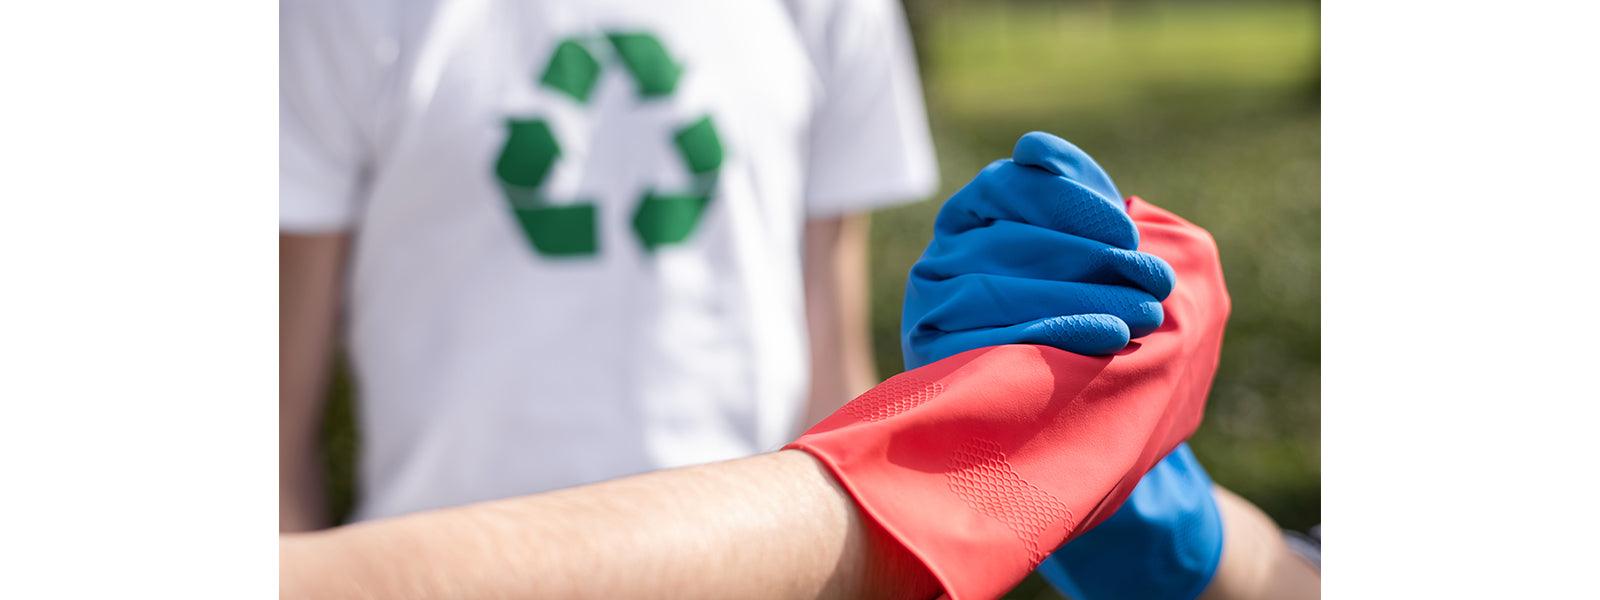 Glove Recycling Initiatives: Reducing Waste and Promoting Sustainability - VizoCare